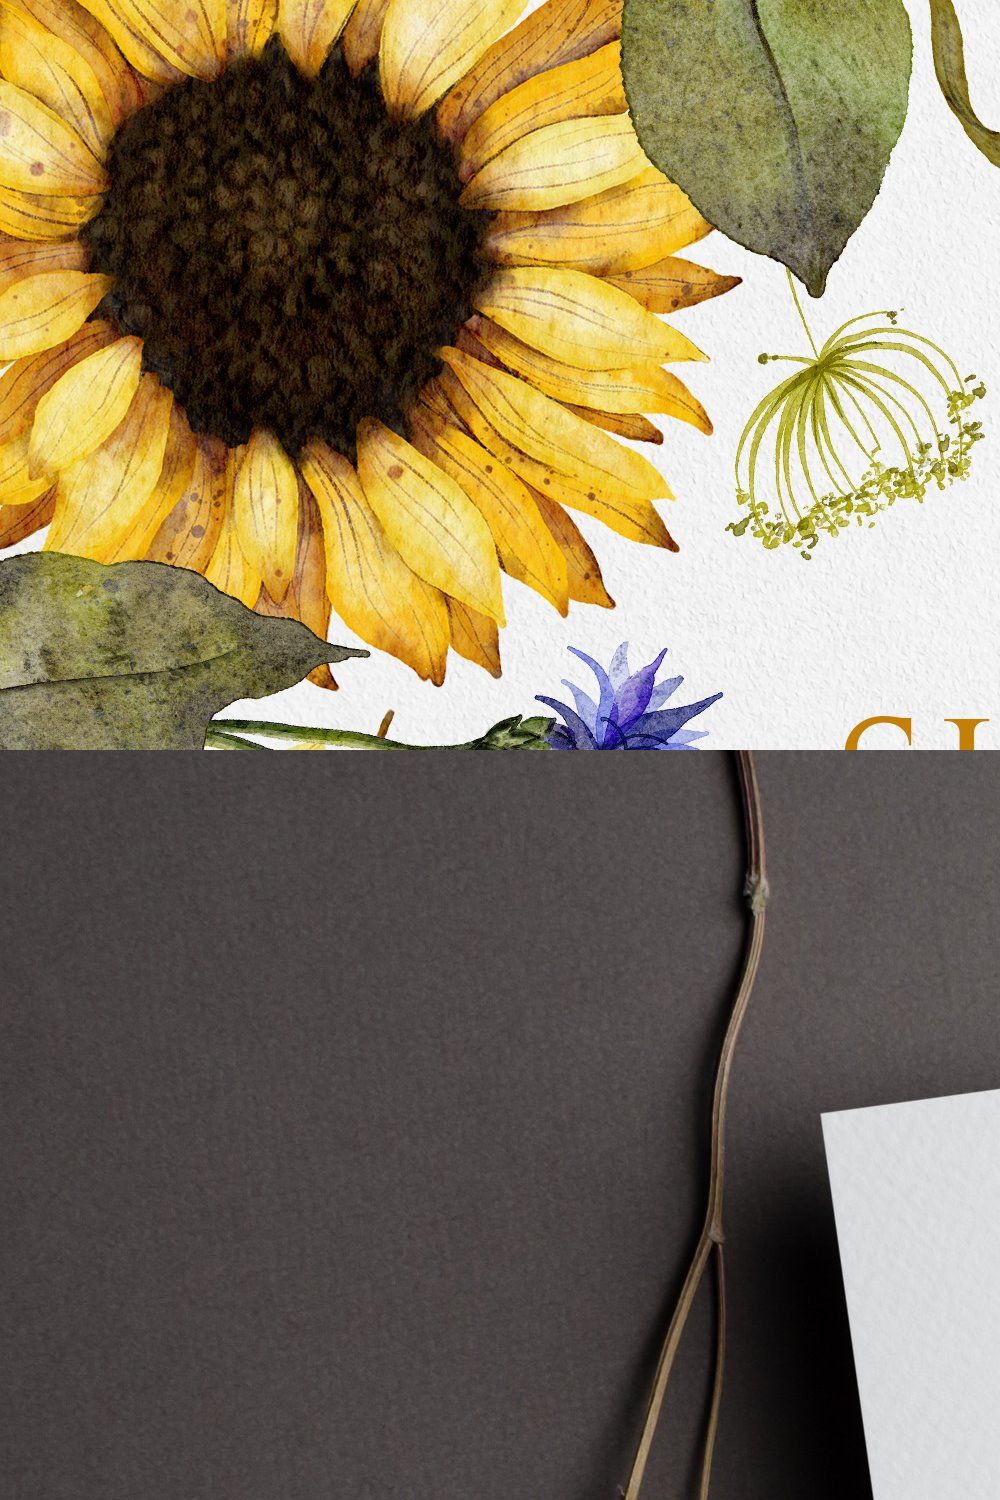 Watercolor Sunflowers Clipart pinterest preview image.